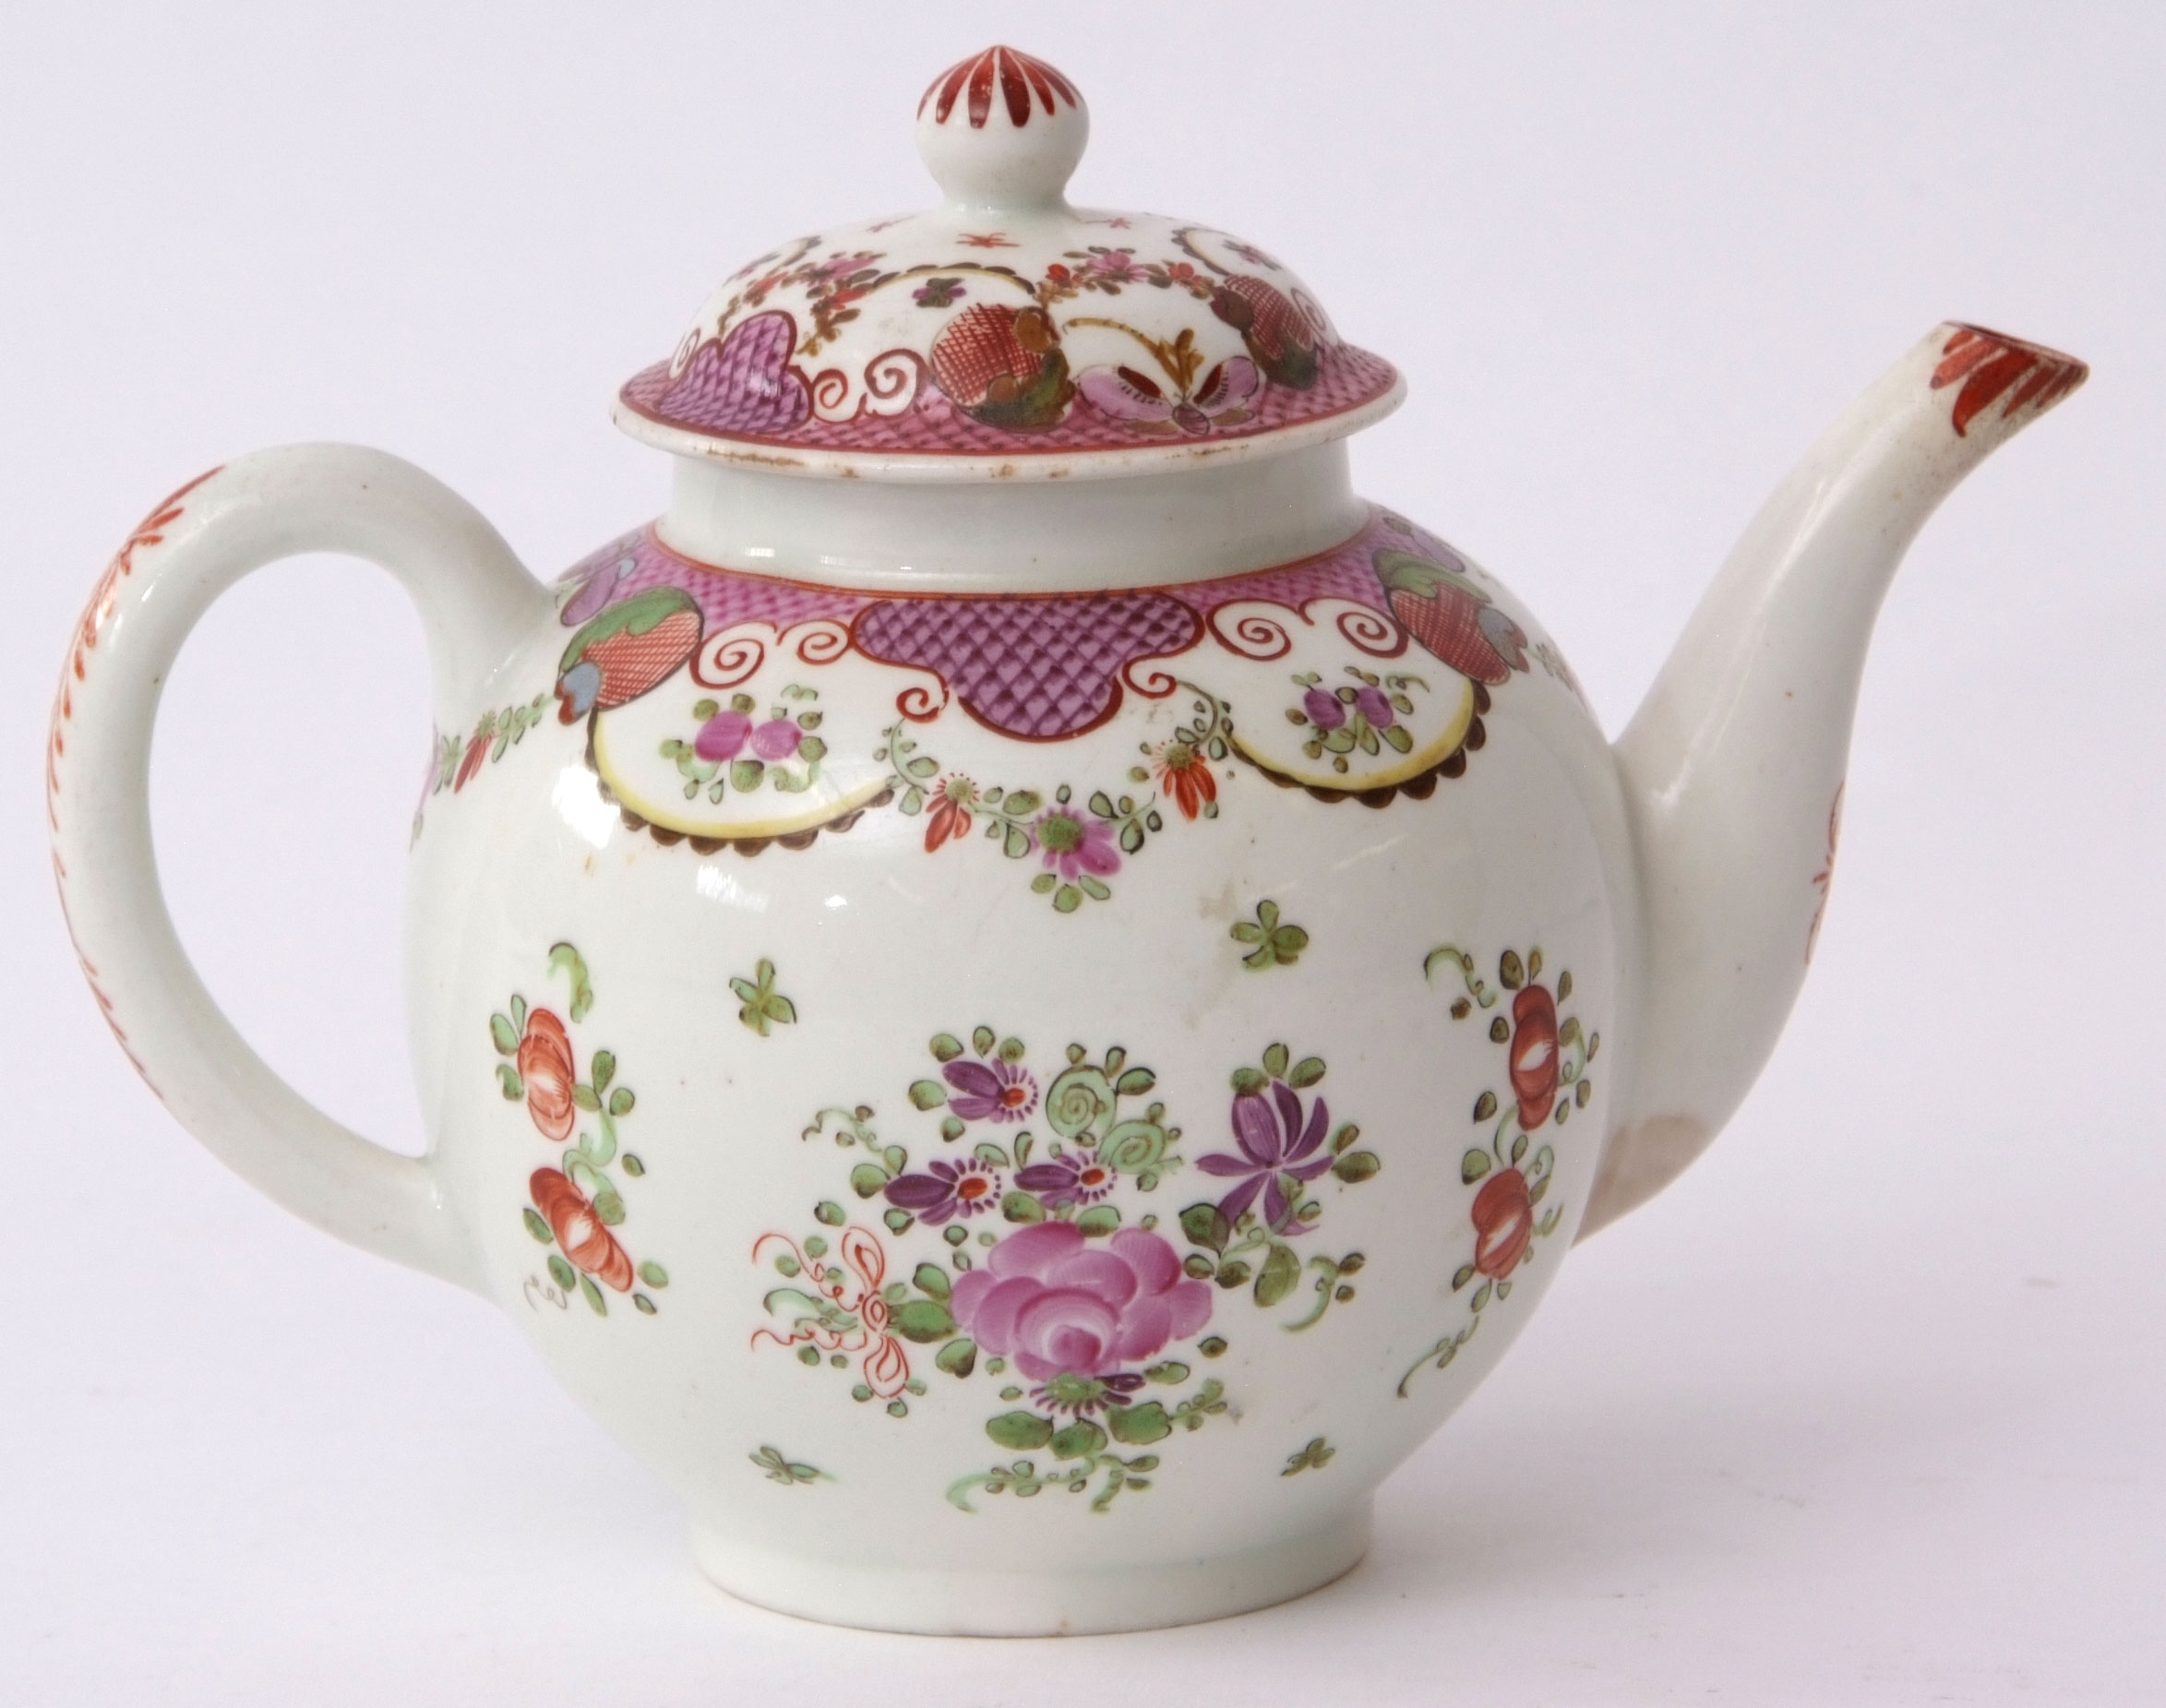 Lowestoft porcelain tea pot and cover circa 1780, decorated in polychrome with a Curtis type design, - Image 3 of 4